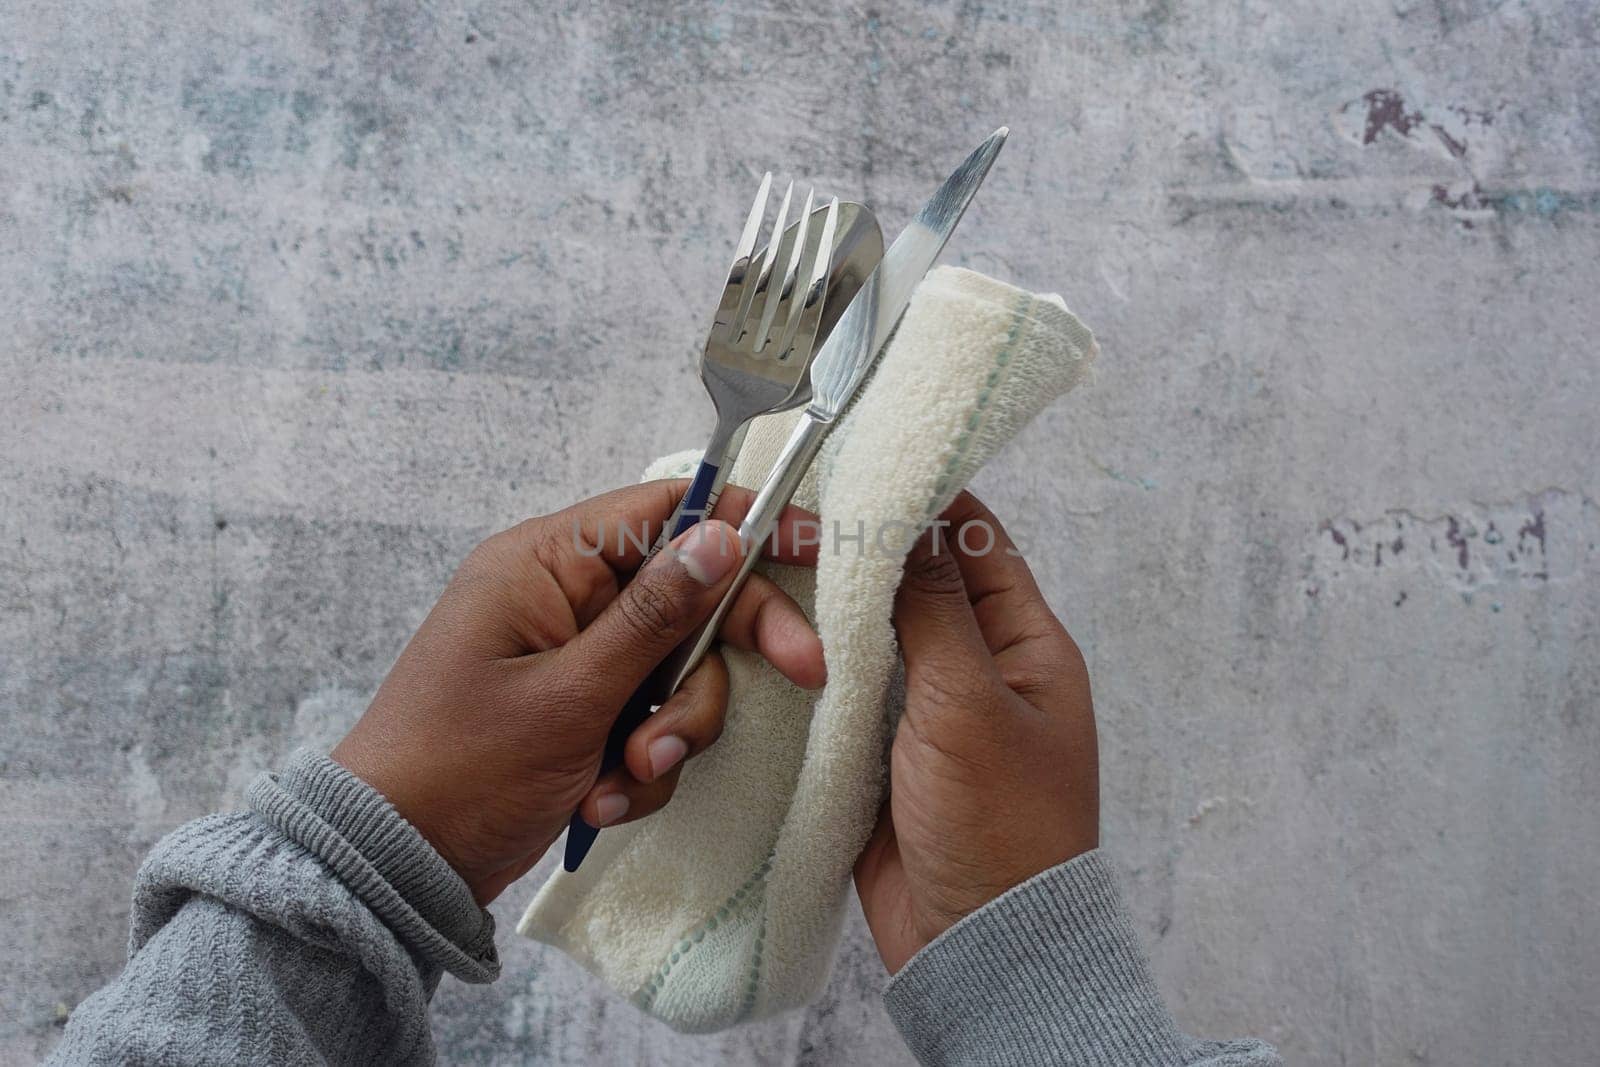 person hand cleaning and drying cutlery with a towel by towfiq007